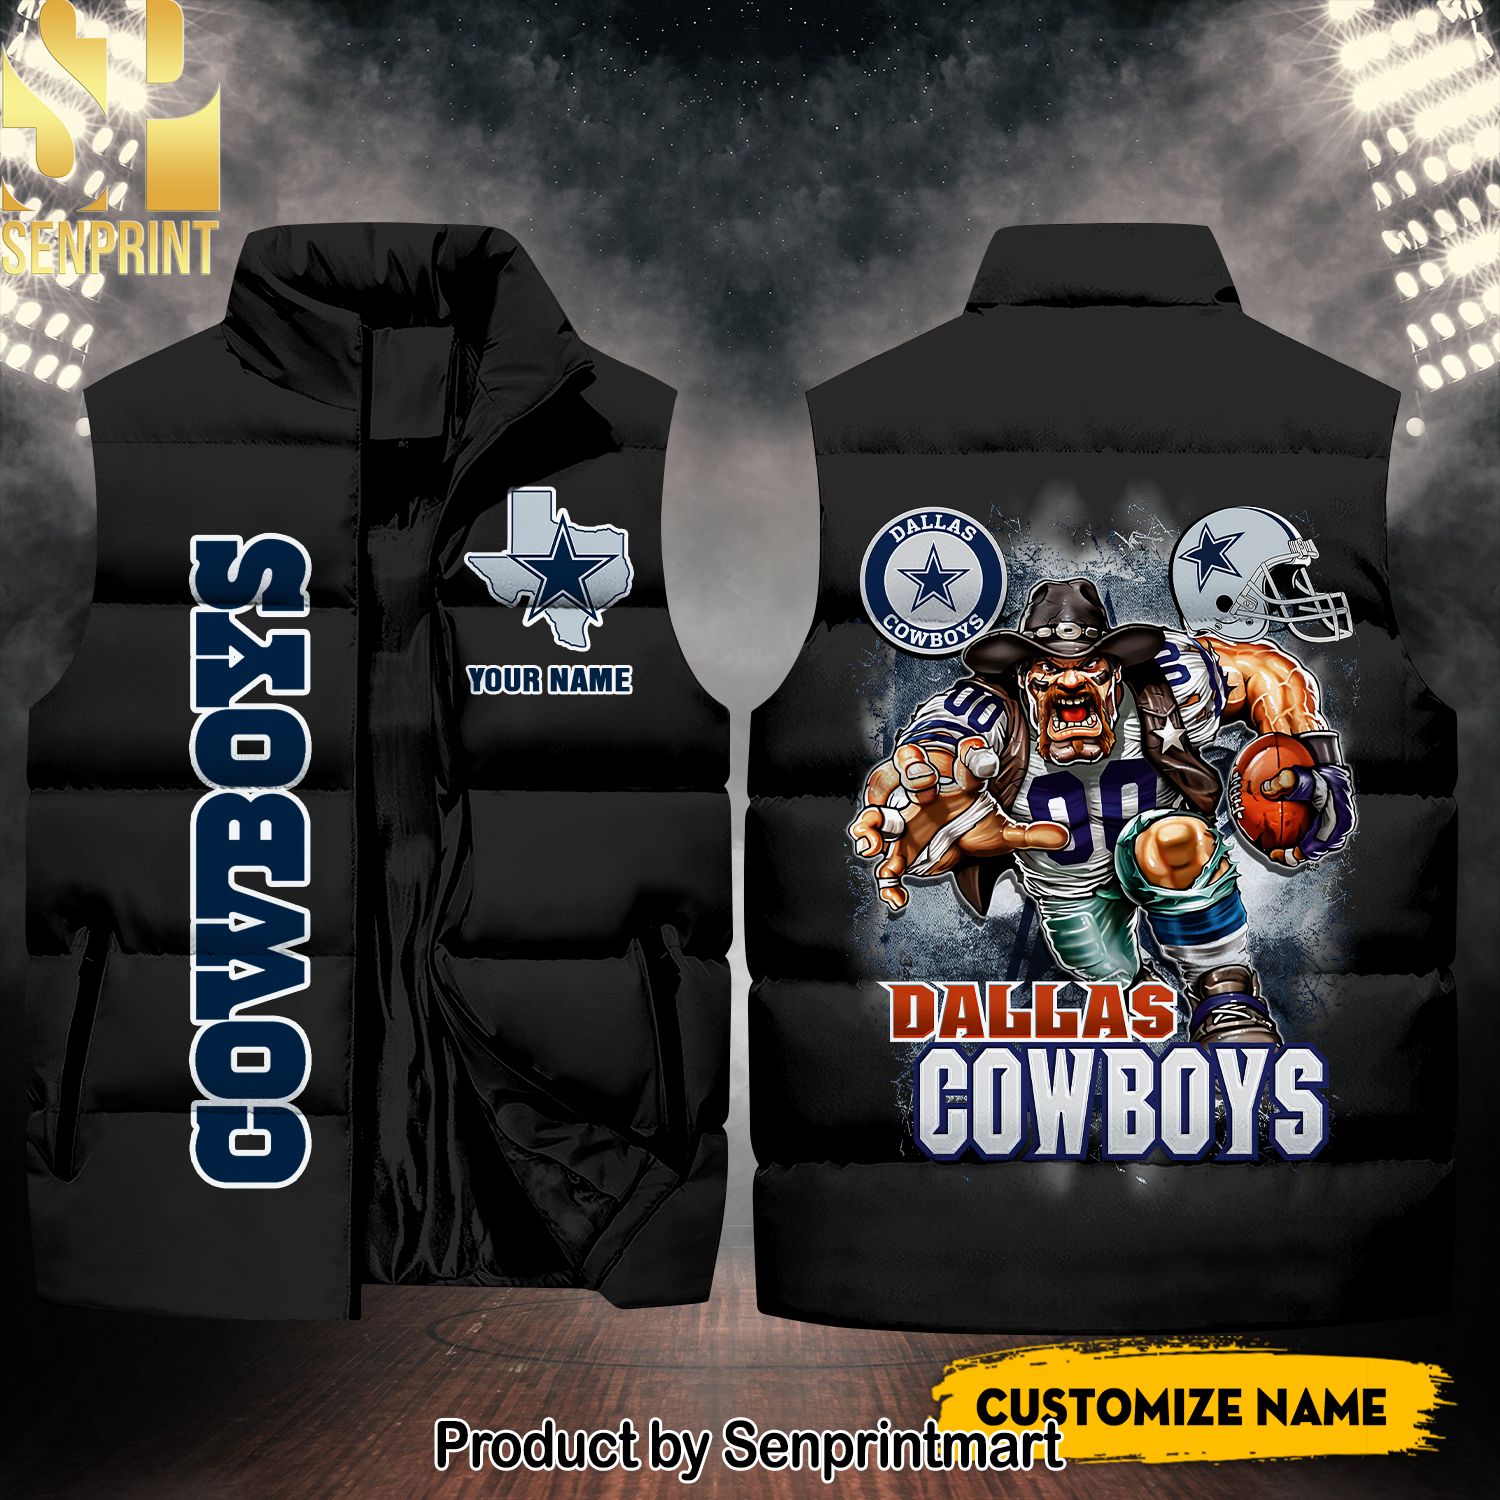 National Football League Dallas Cowboys Personalized Name Hot Outfit Sleeveless Jacket